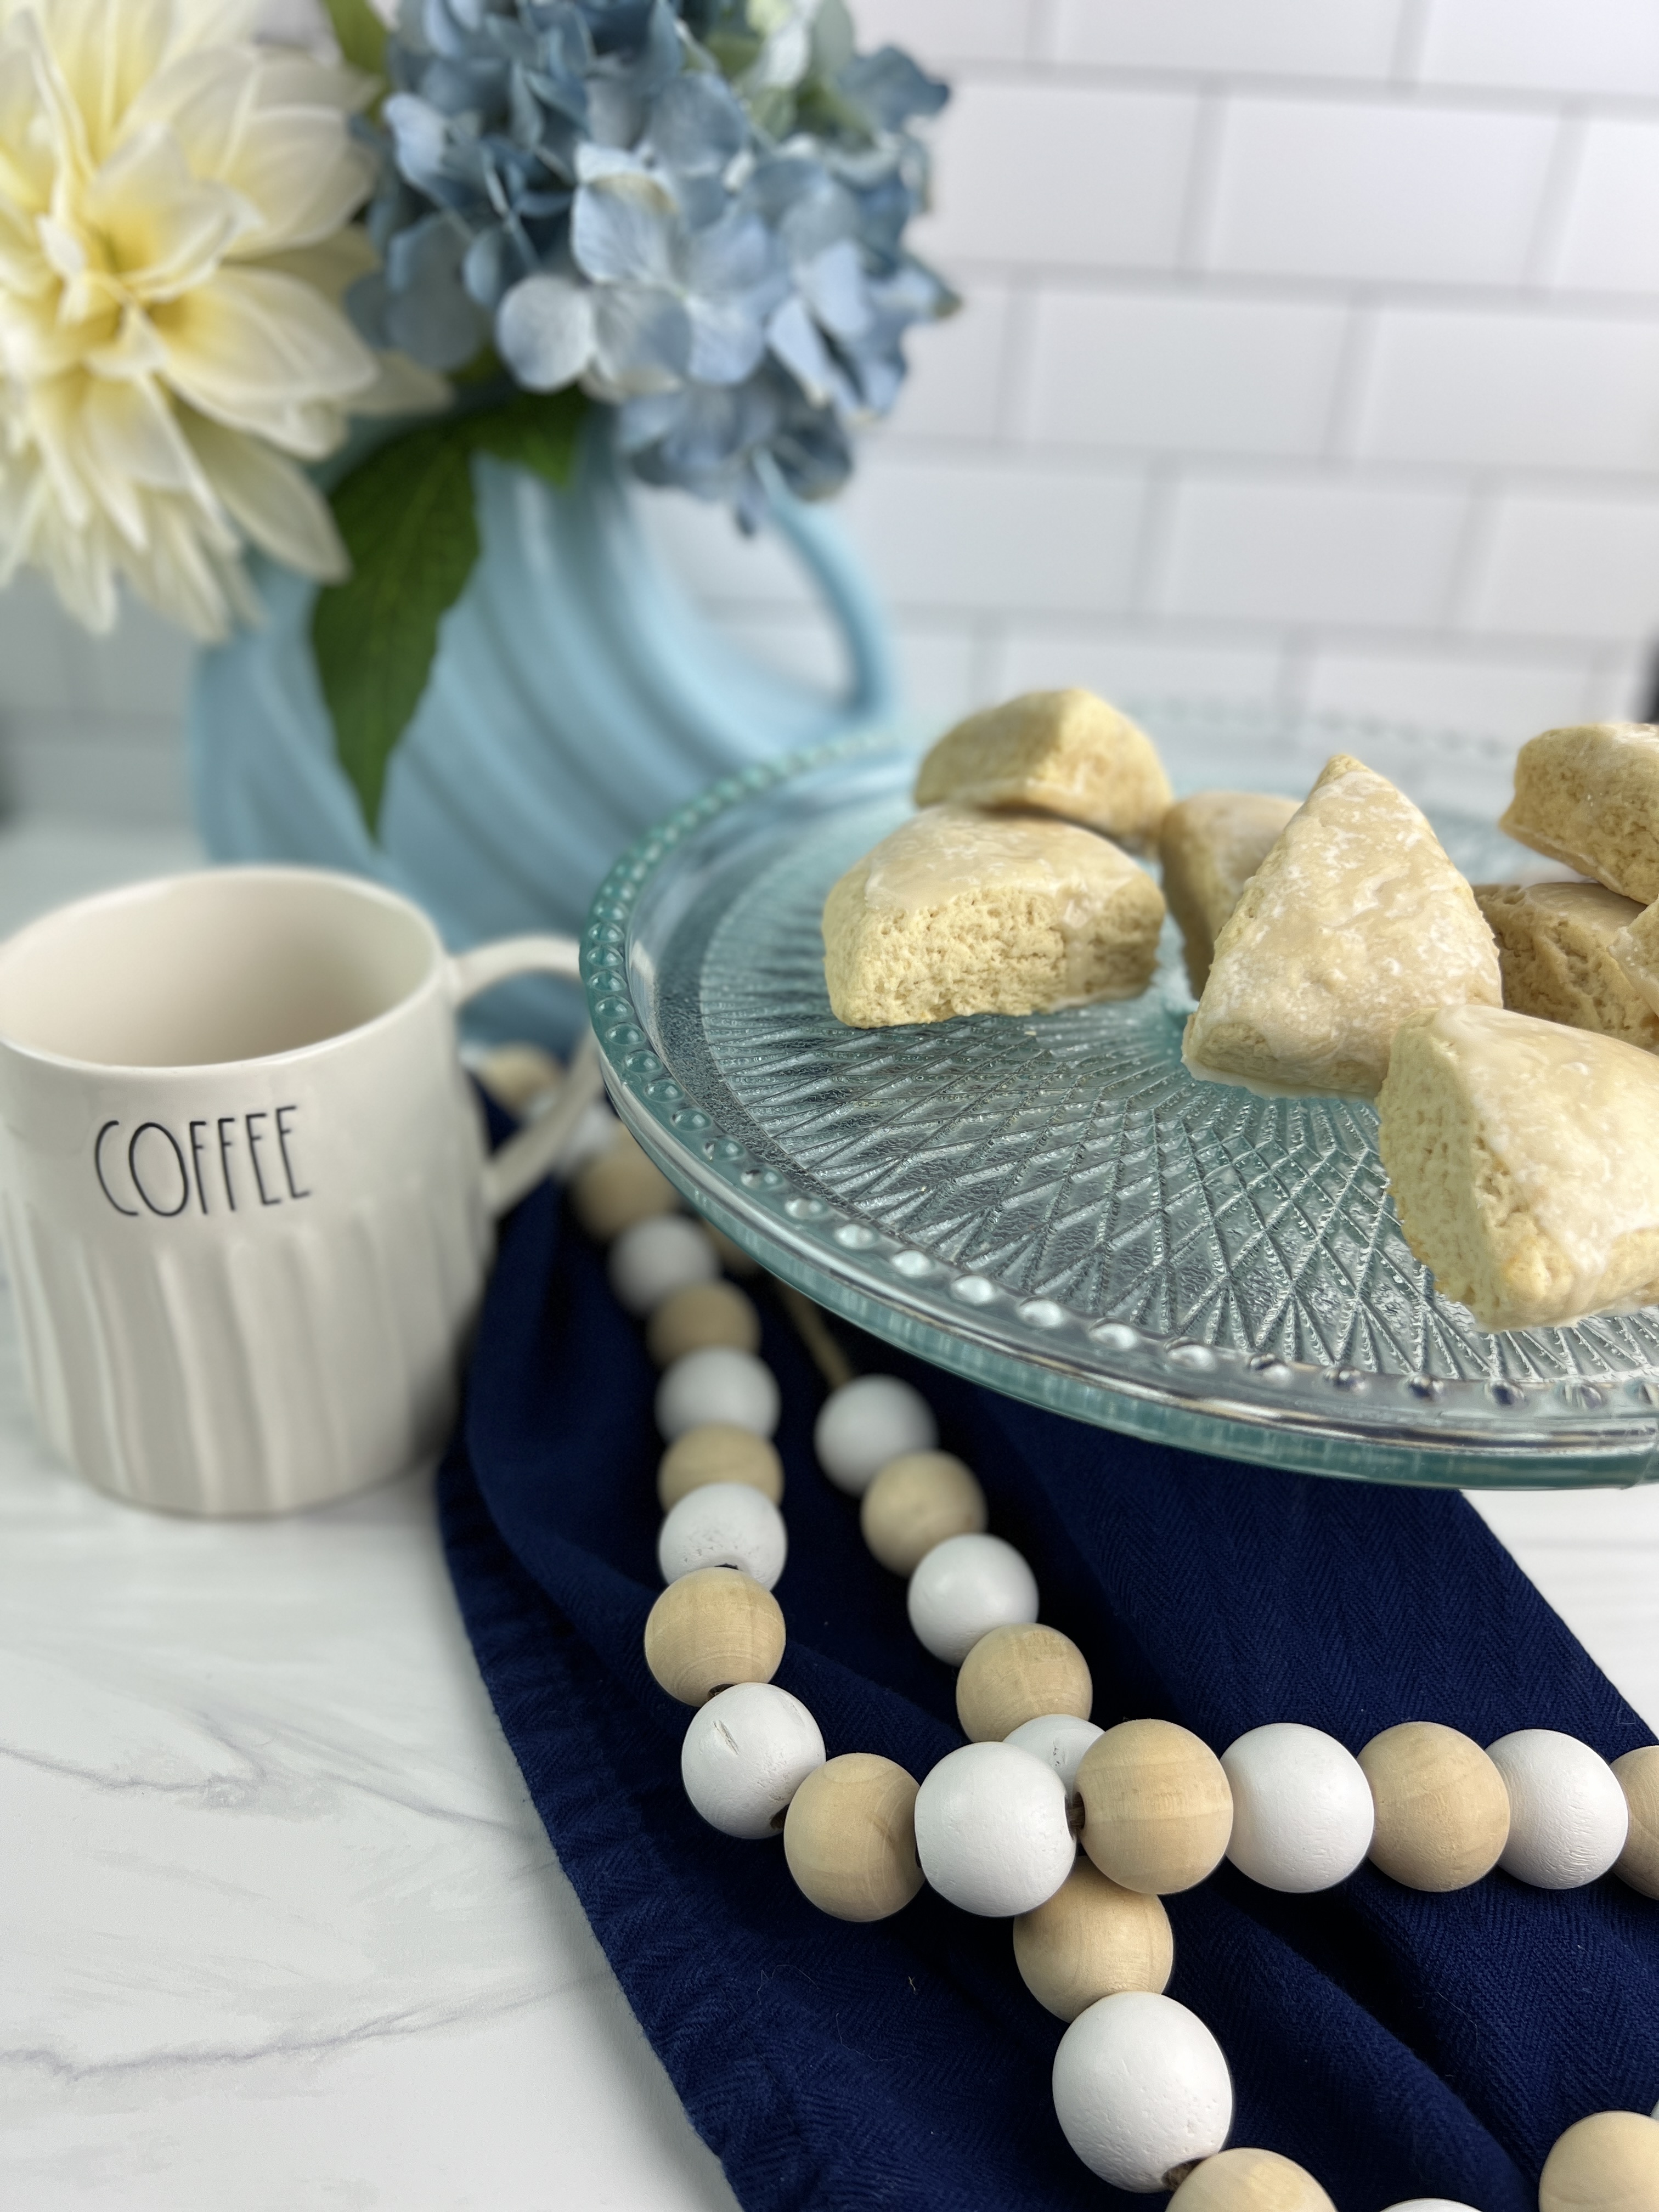 These buttery, tender Petite Vanilla Scones are easy to make and are perfect with a cup of coffee or tea.